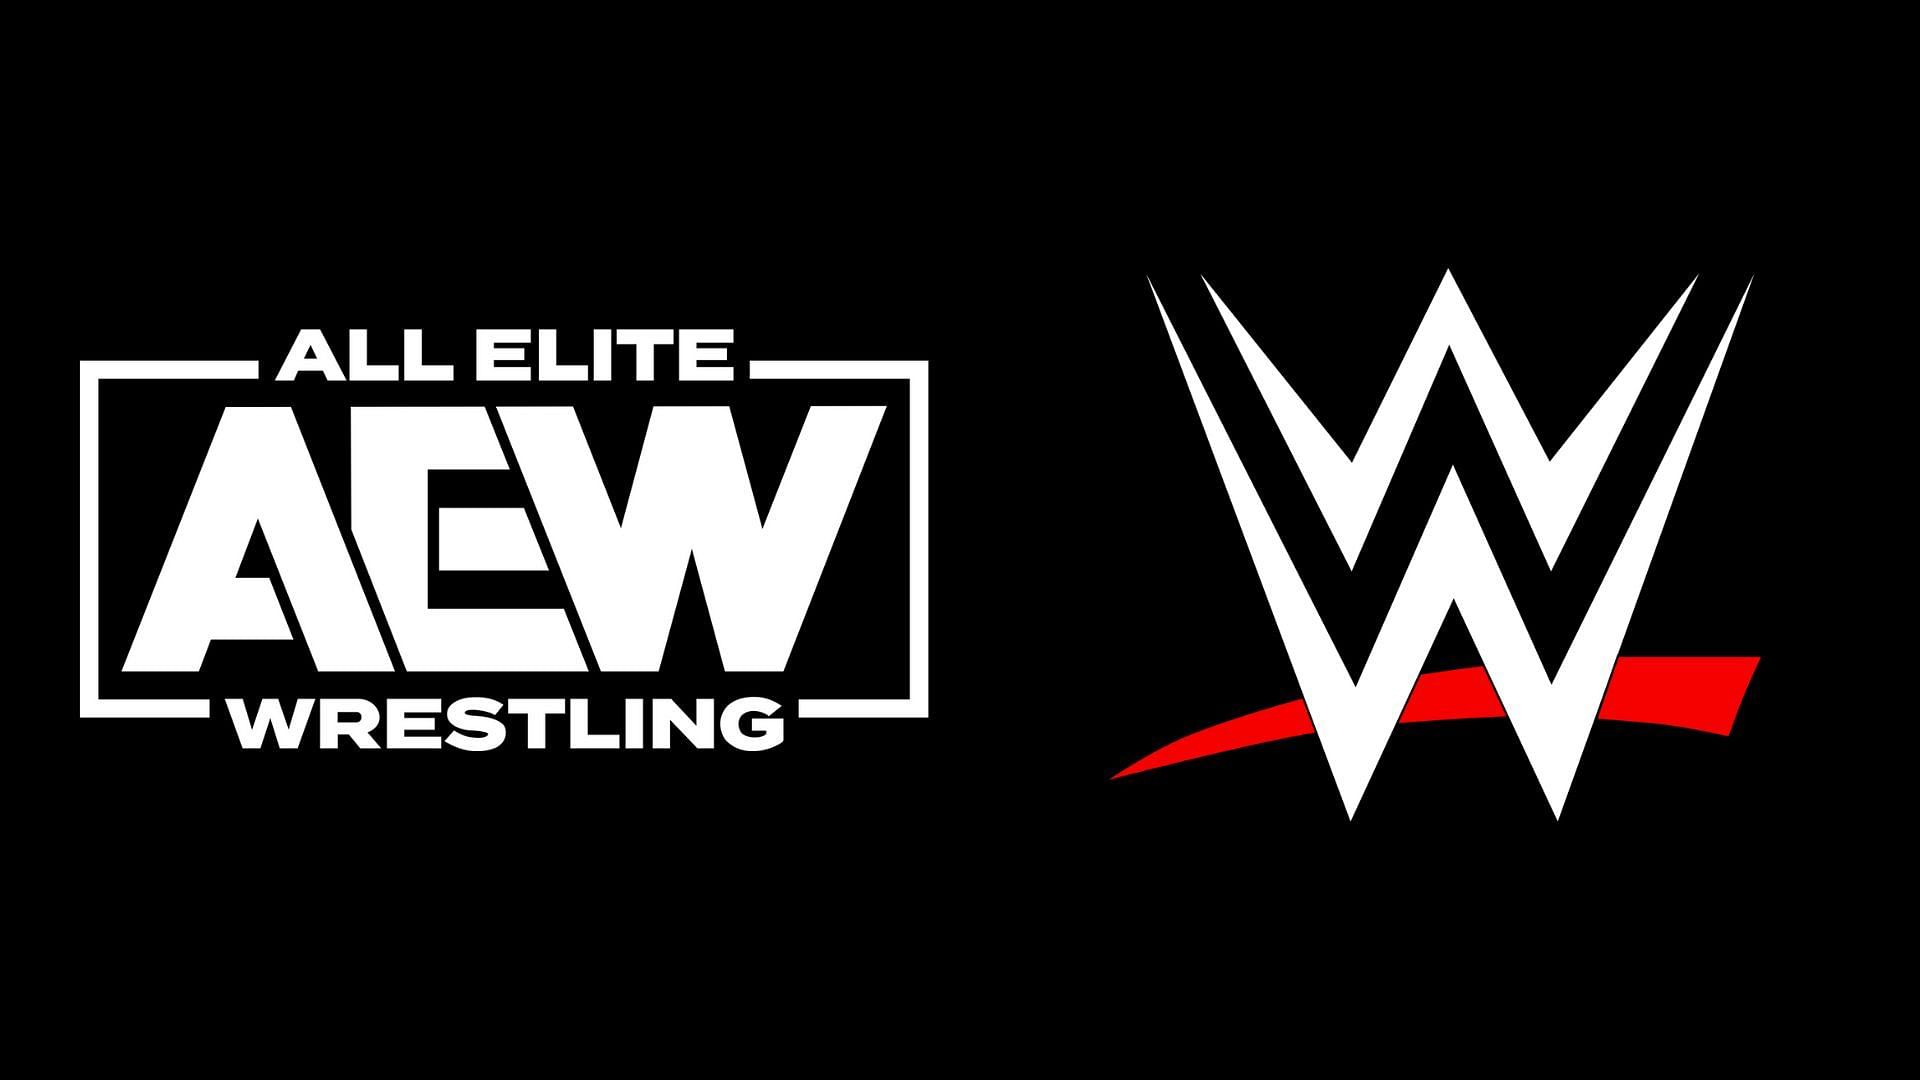 Could this star be on their way to AEW?